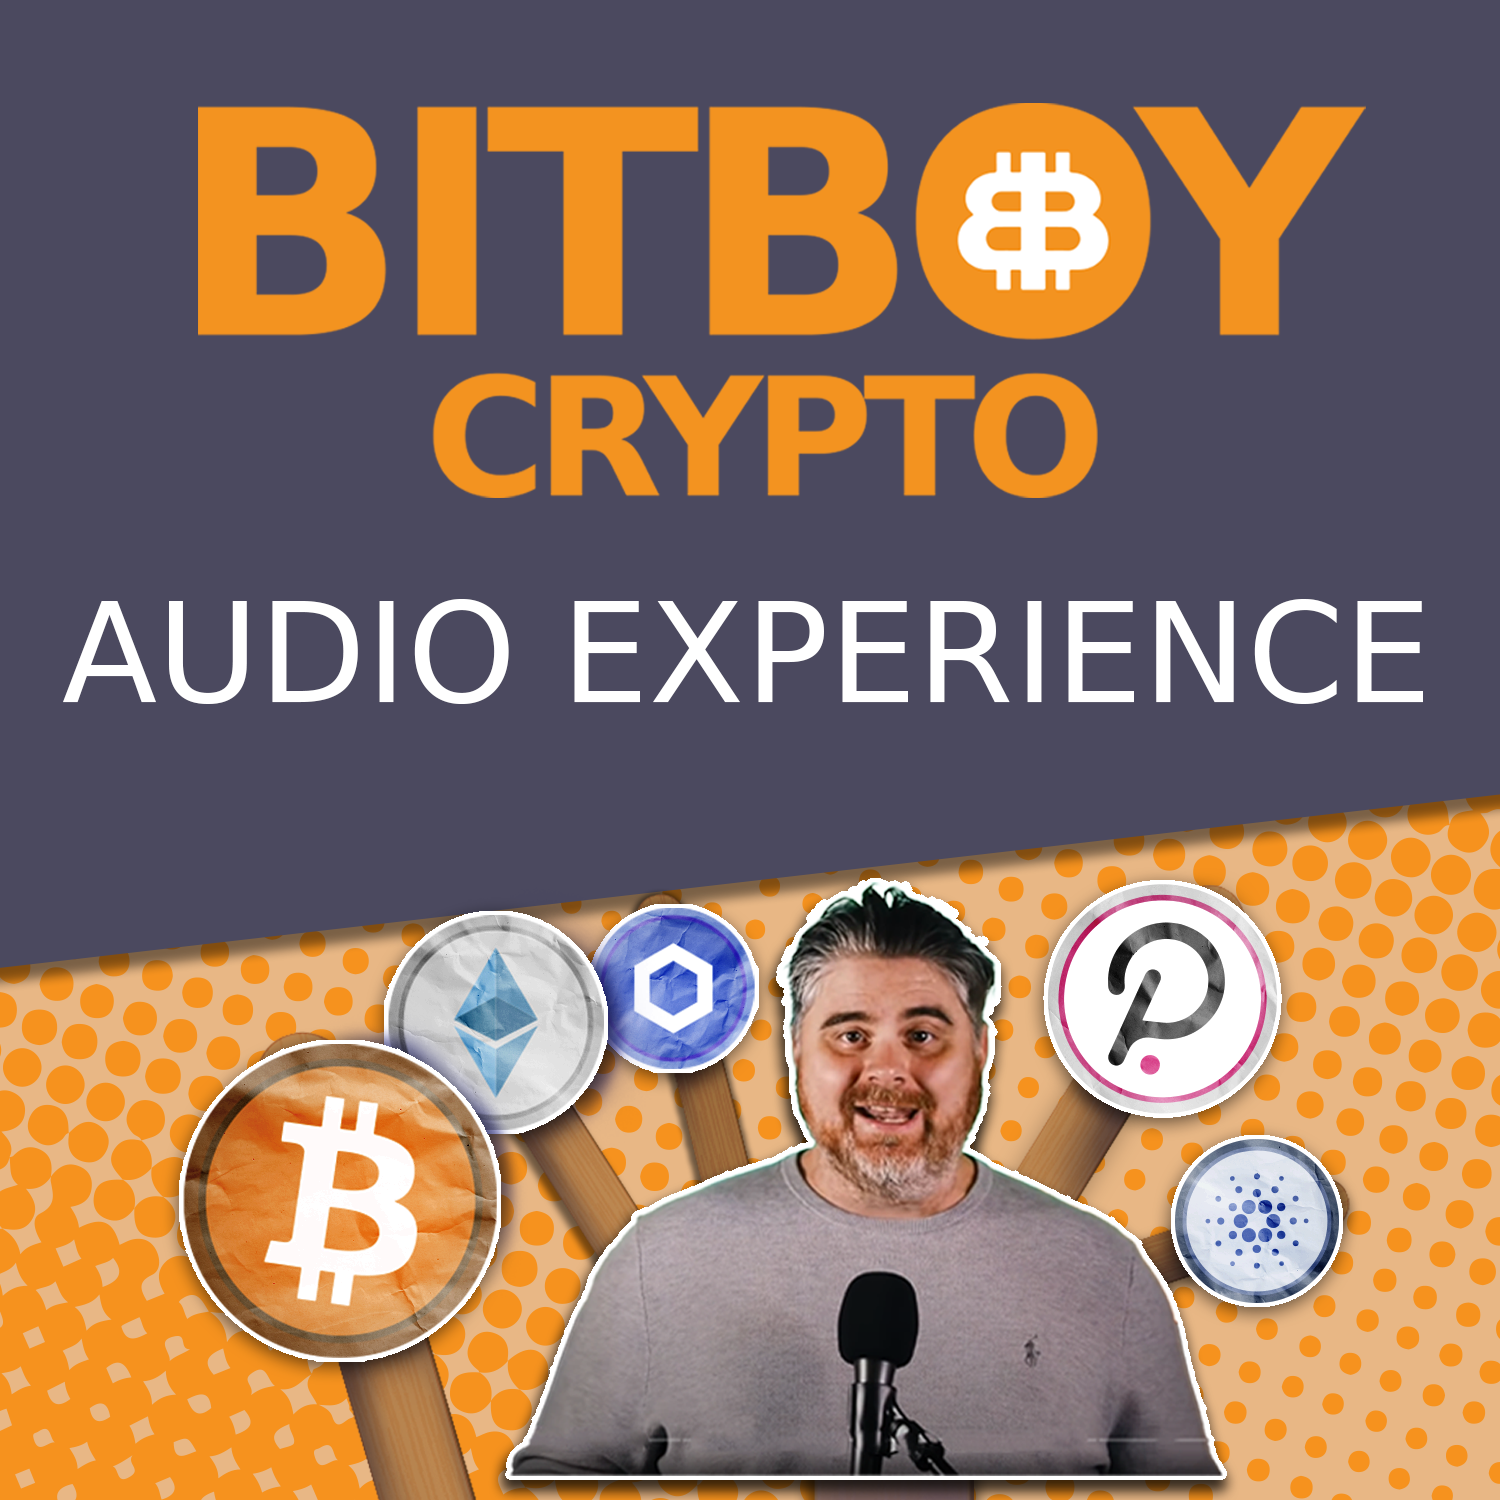 Fresh update on "euro" discussed on The Bitboy Crypto Podcast